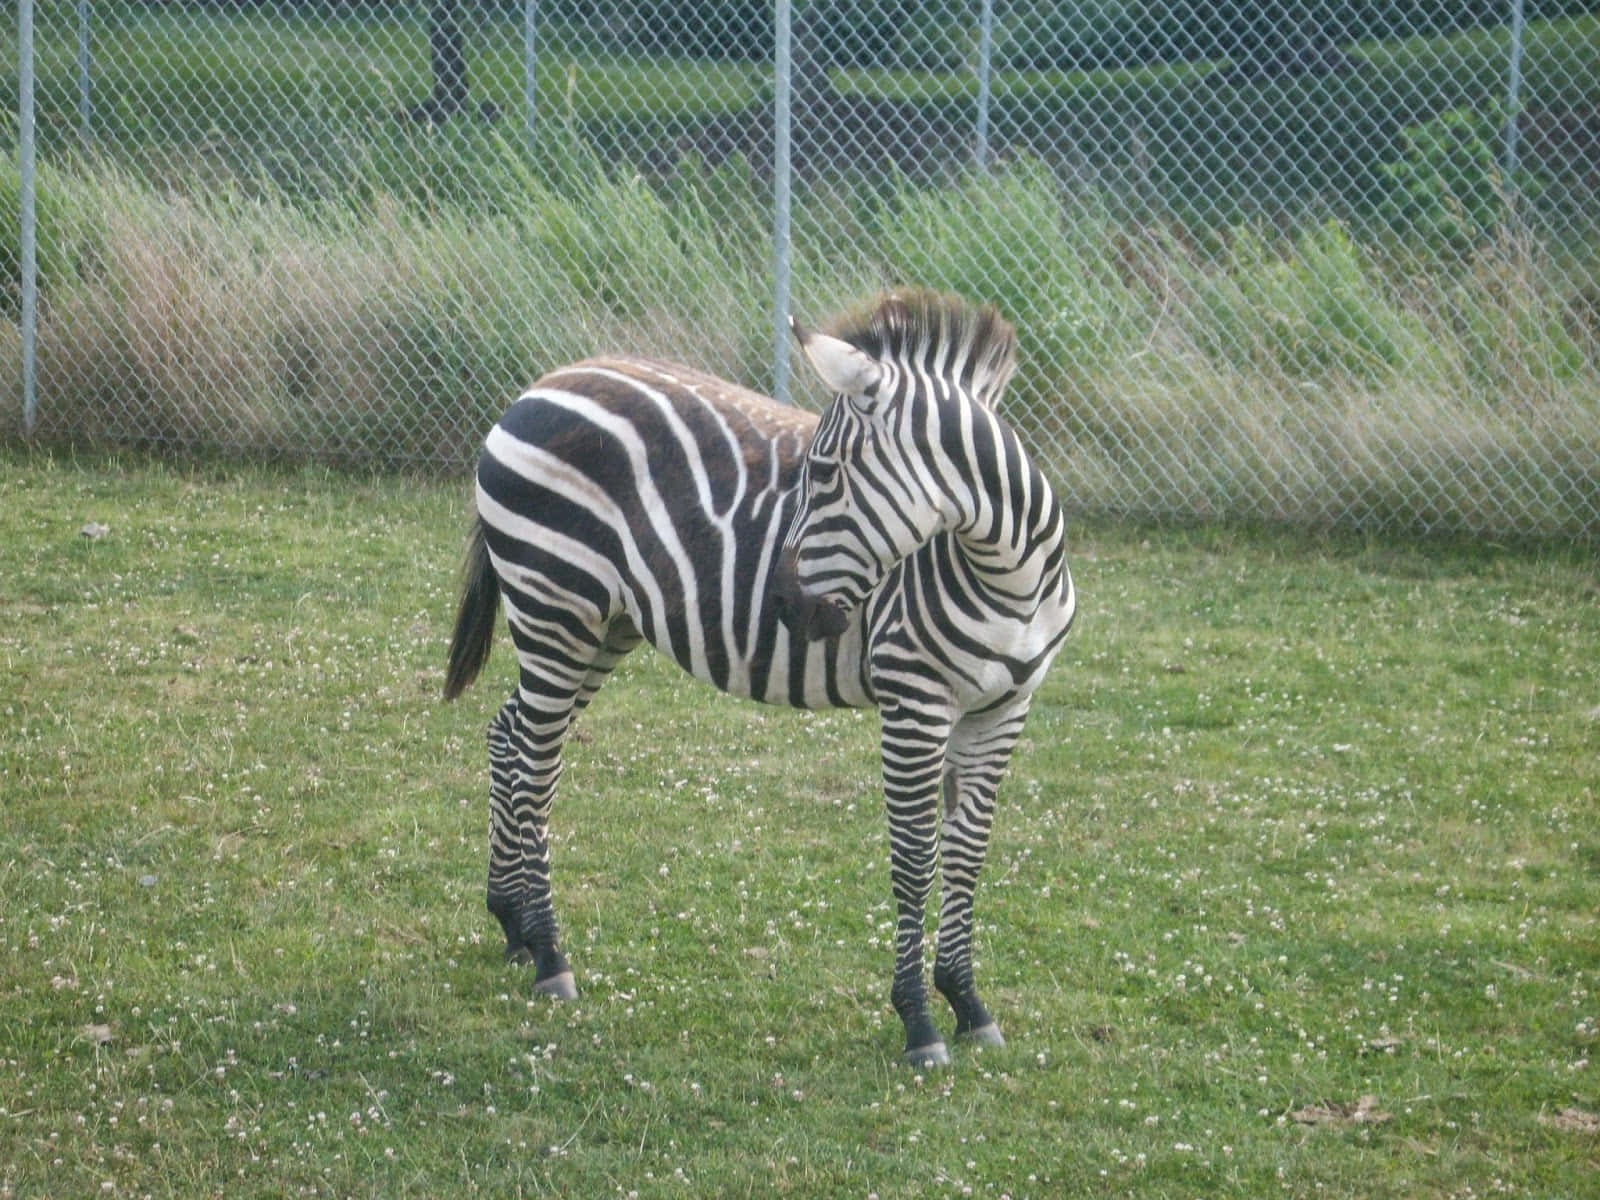 Staying at a safe distance: A Zebras quietly observing its surroundings at the zoo